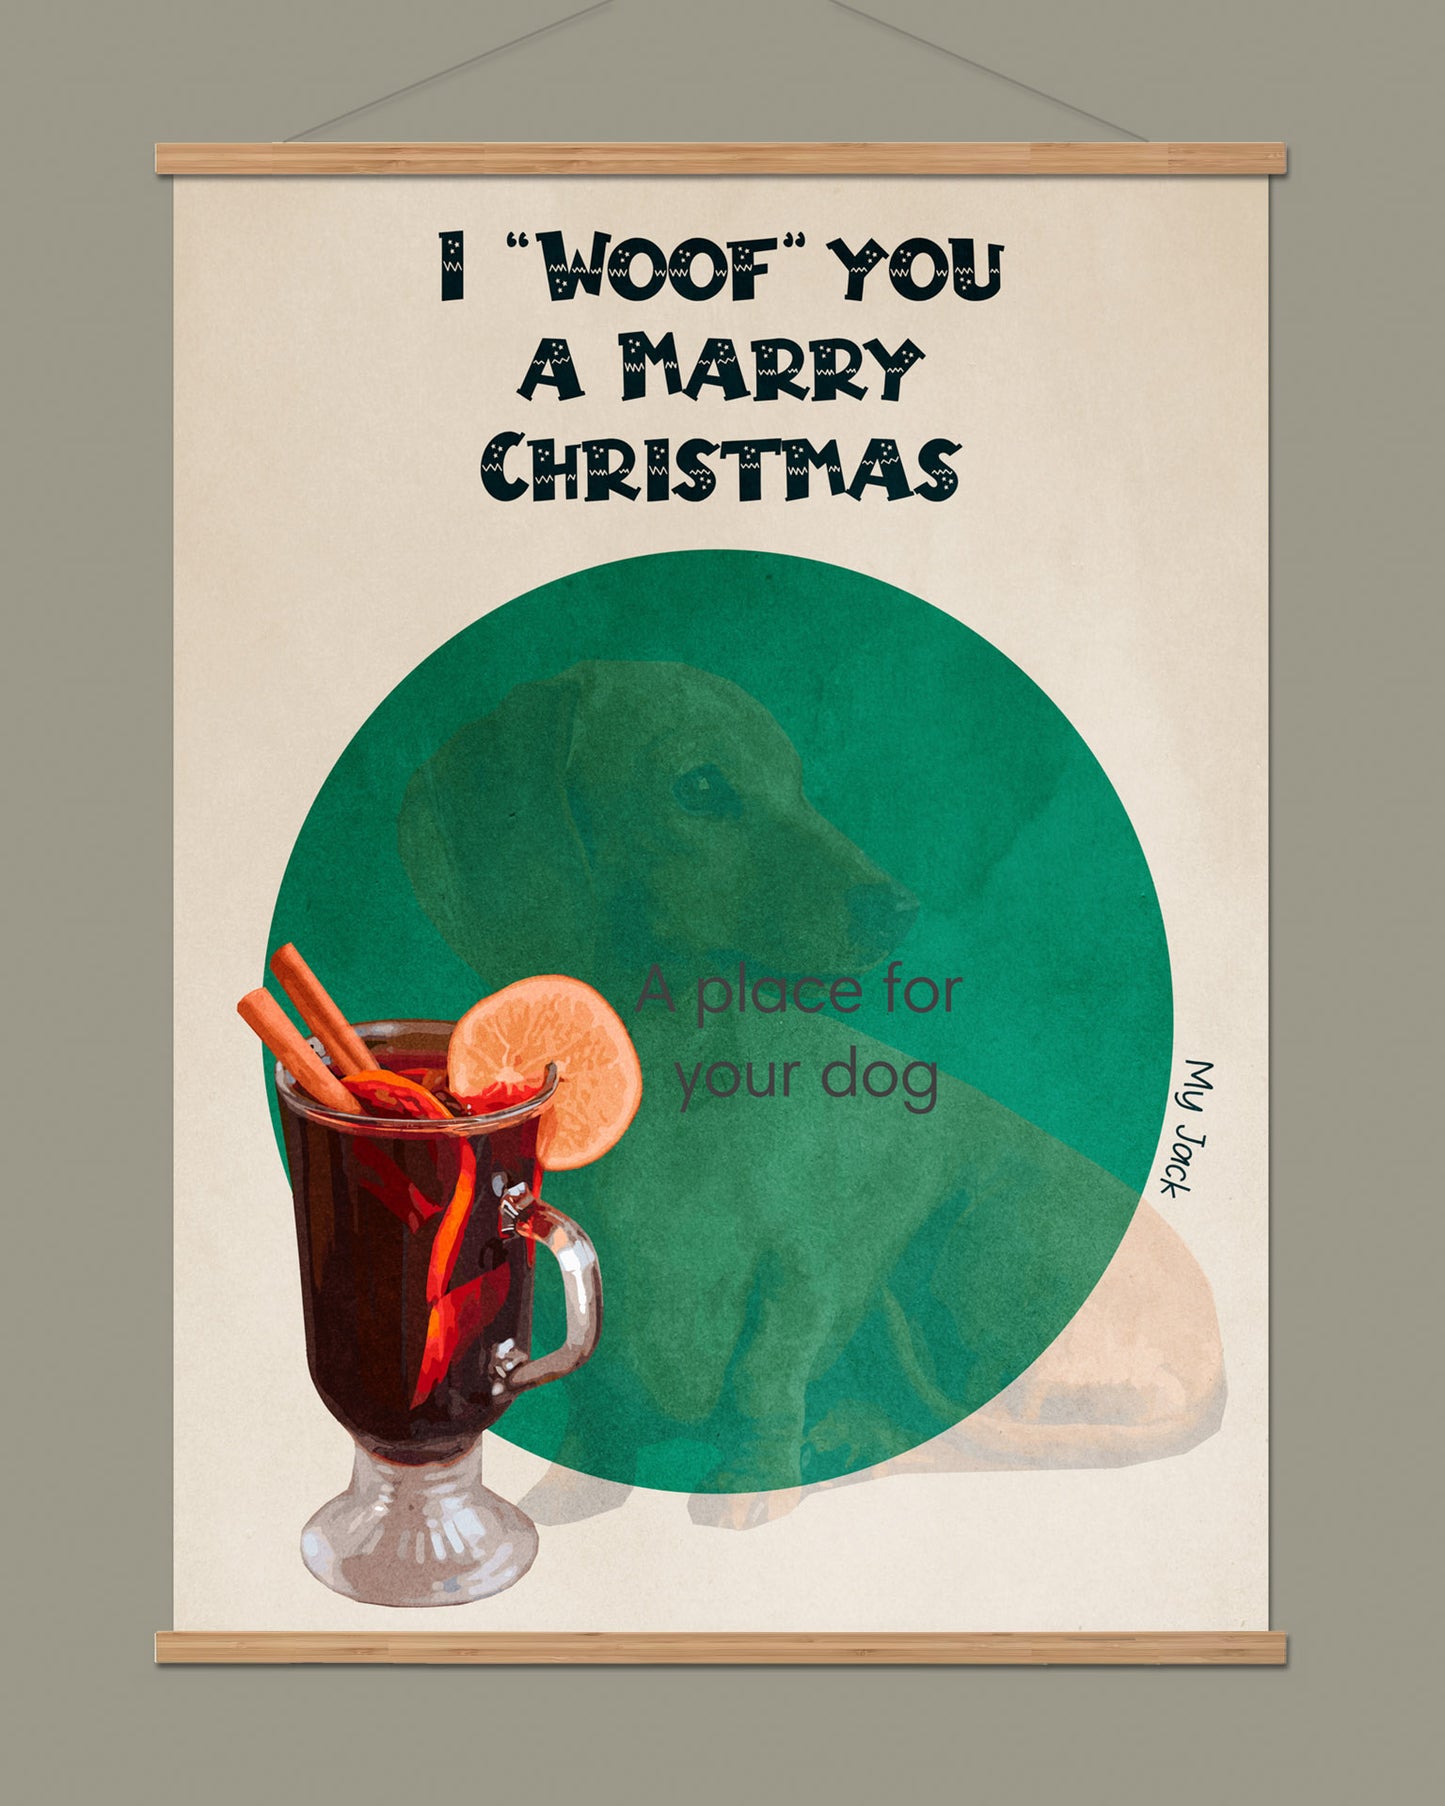 Customized dog poster "Merry Christmas"